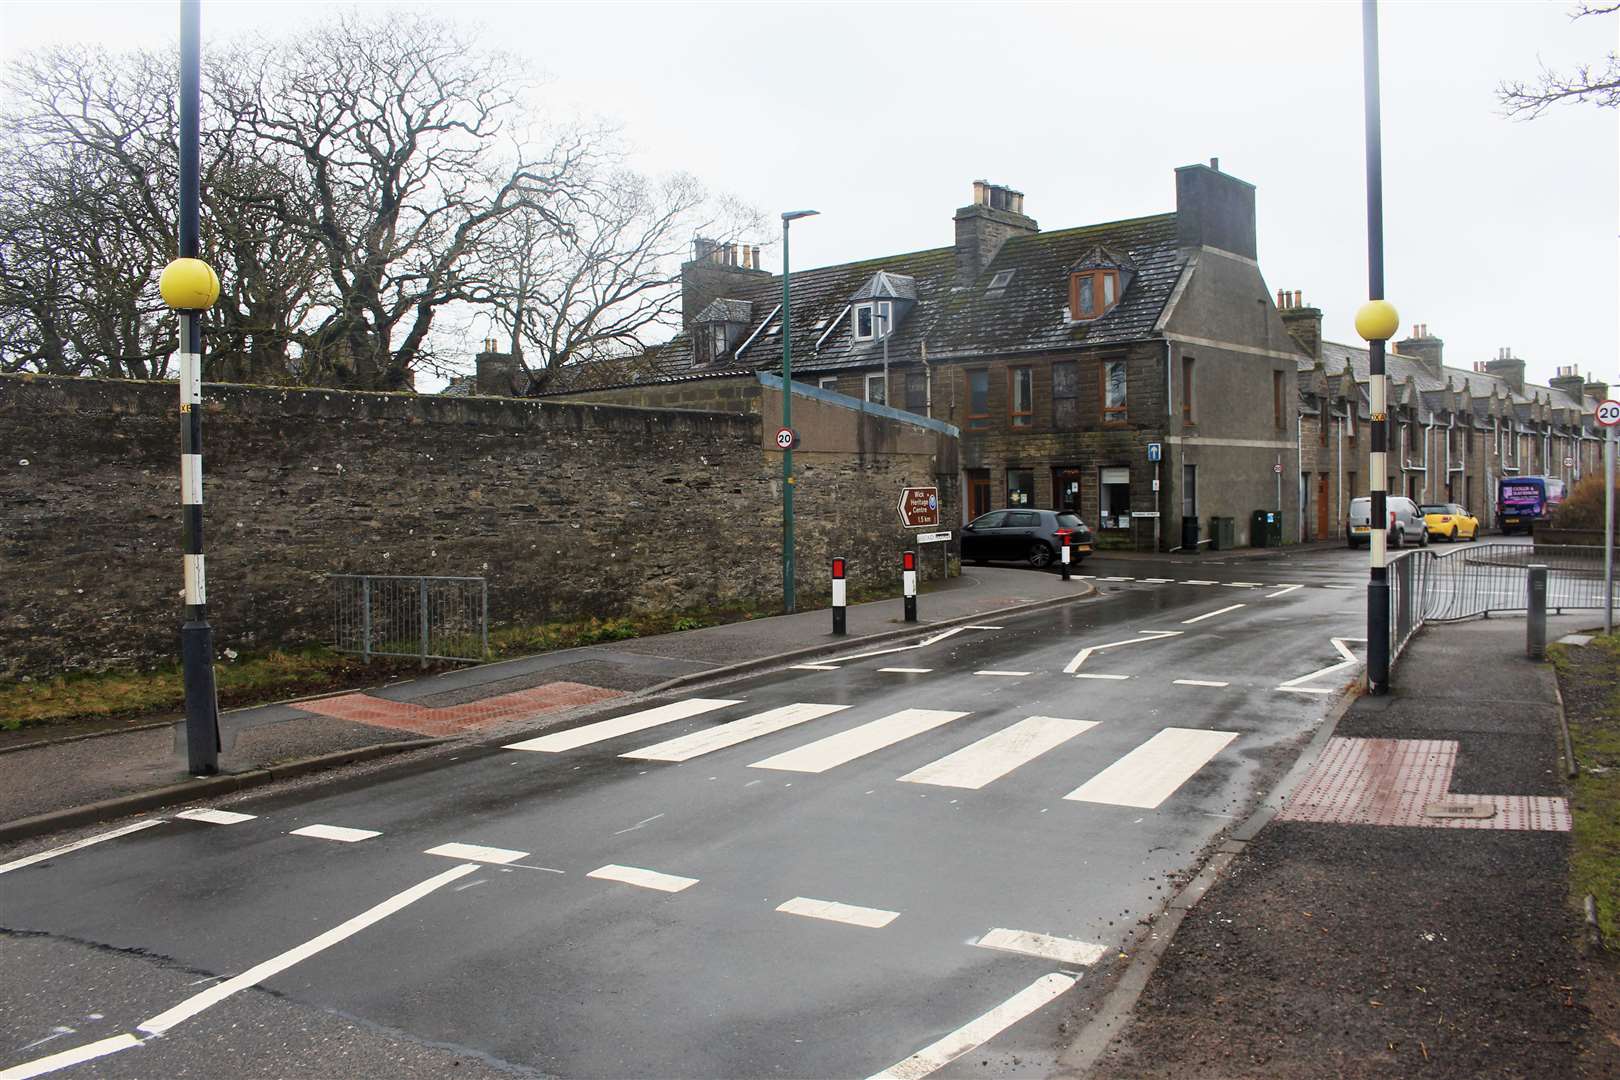 The zebra crossing near the corner of Bankhead Road, with white markings restored.